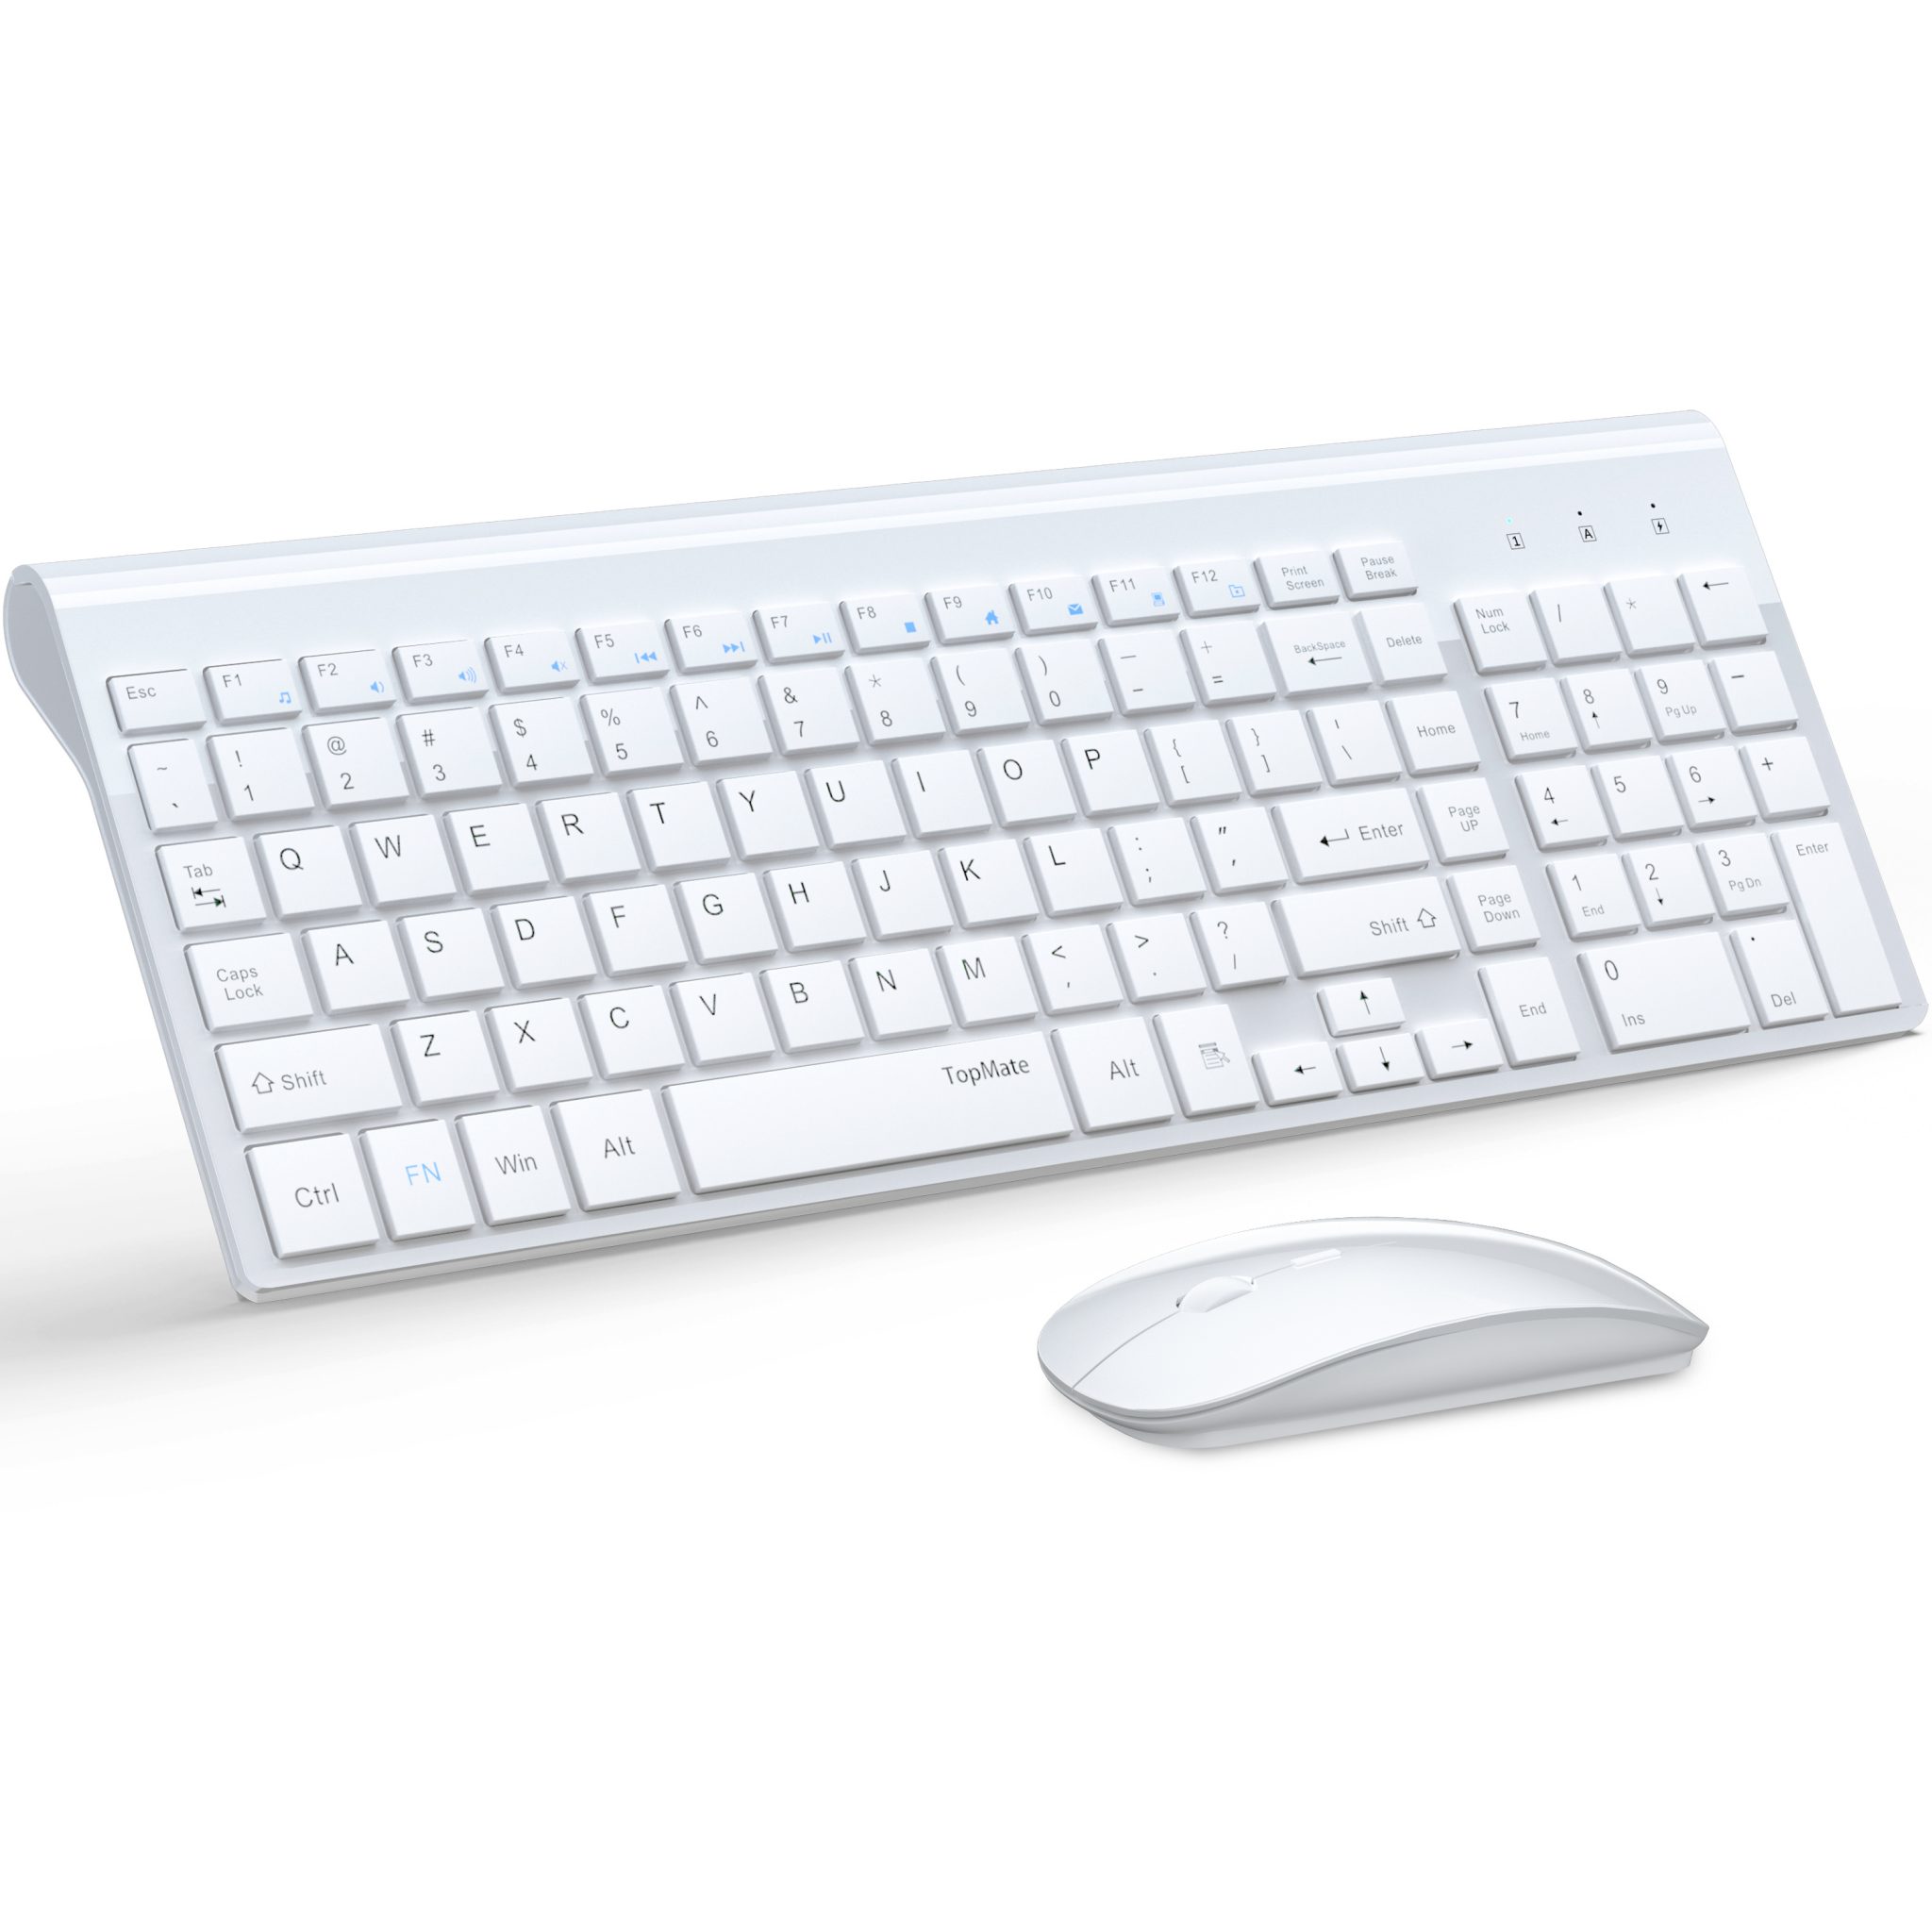 Wireless Keyboard and Mouse Combo Designed for Office and Home Use